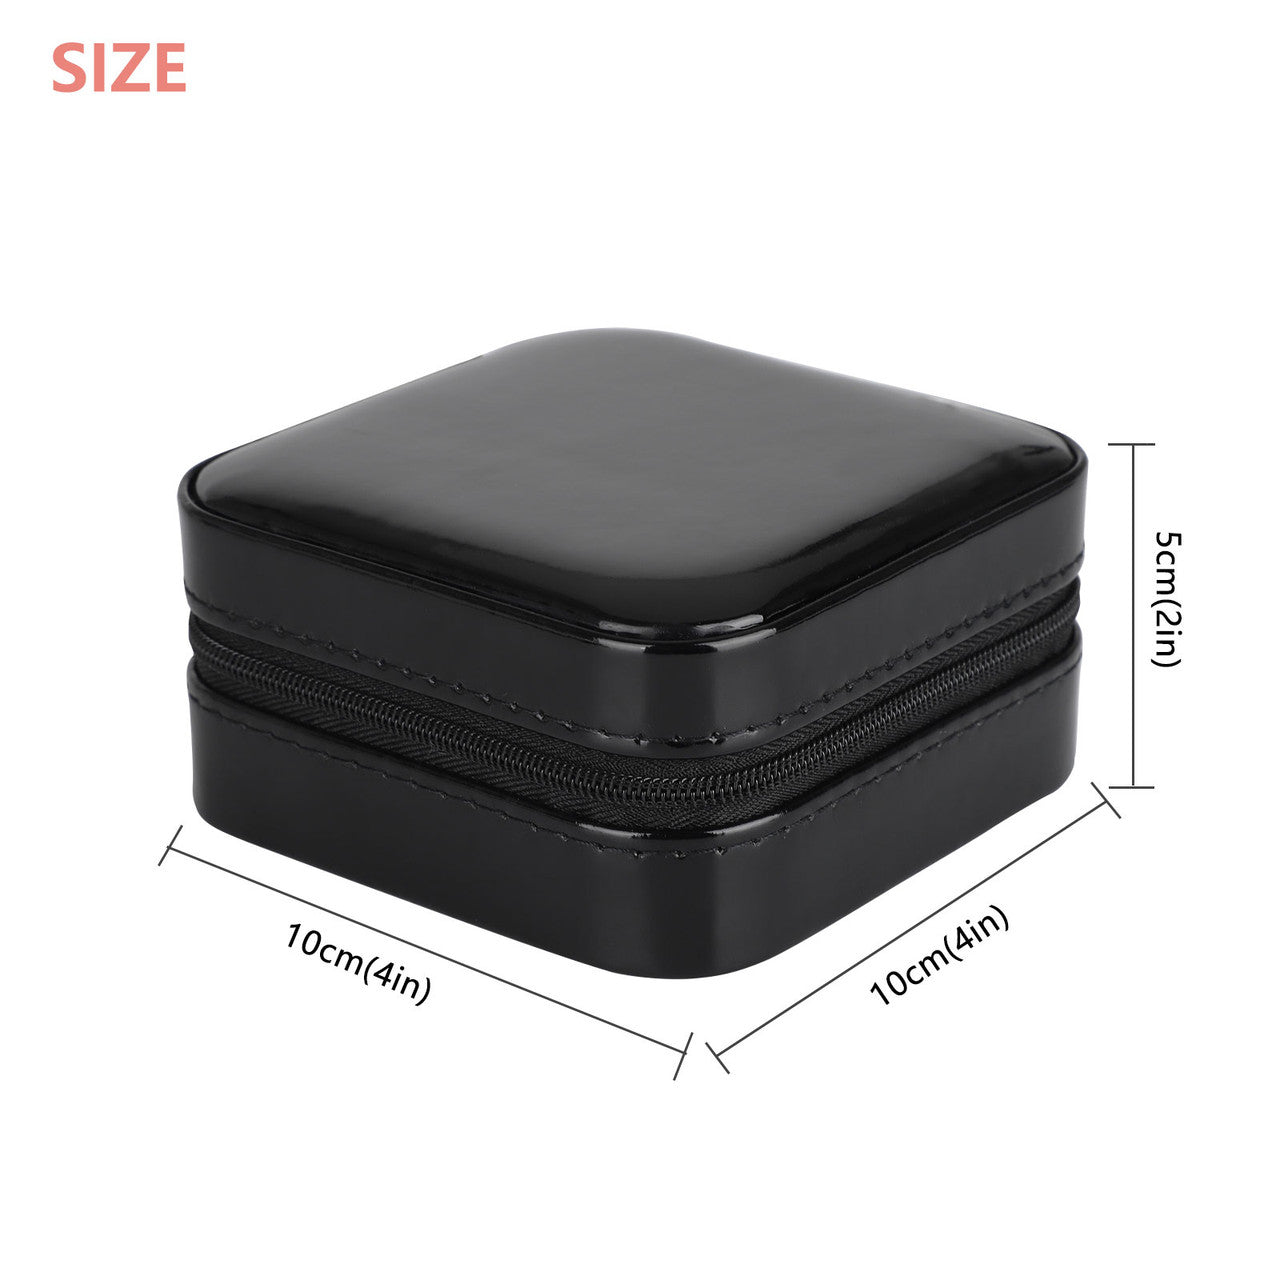 Jewelry Box for Women, Jewelry Organizer with Zipper for Earrings Bracelets Rings, PU Leather Jewelry Boxes Display Storage Case Jewelry Holder for Girls, Black